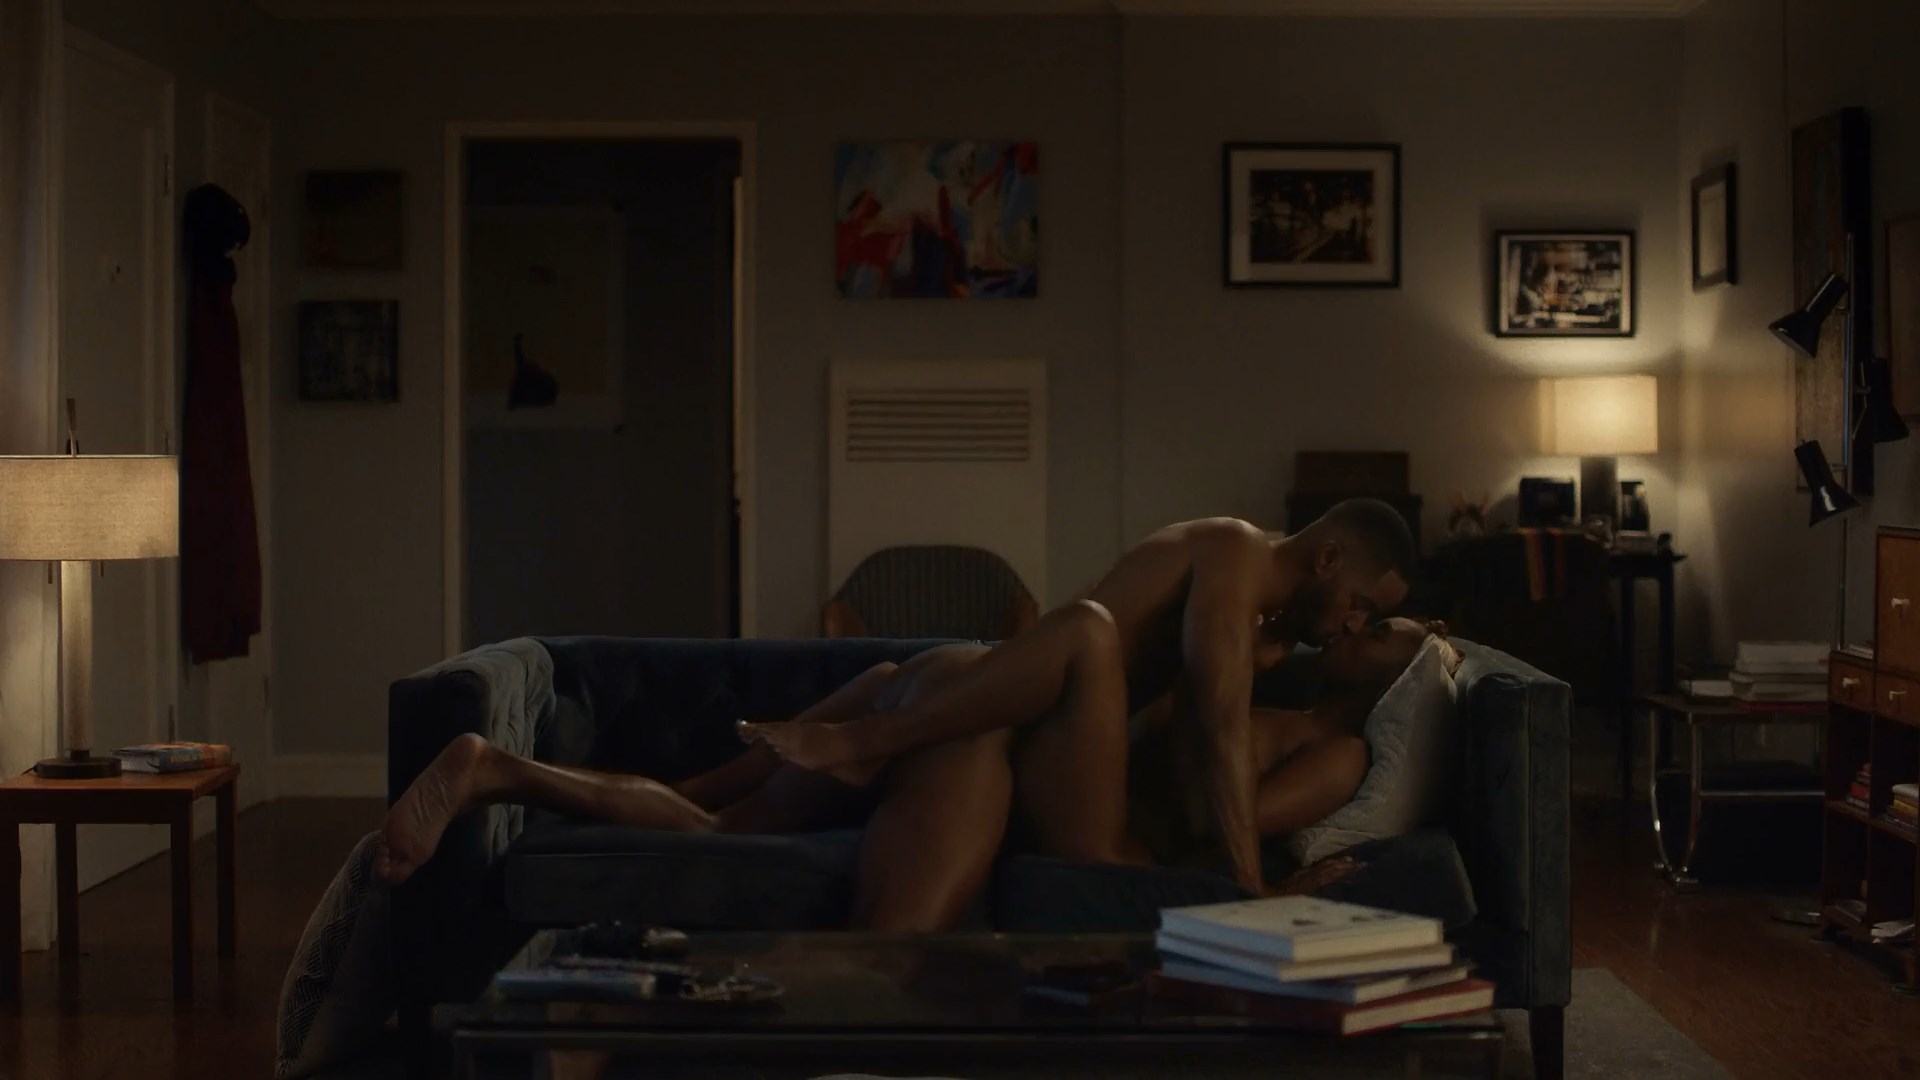 Issa Sex Video Hindi Sex Video Sex Video - Watch Online - Issa Rae - Insecure s04e09 (2020) HD 1080p